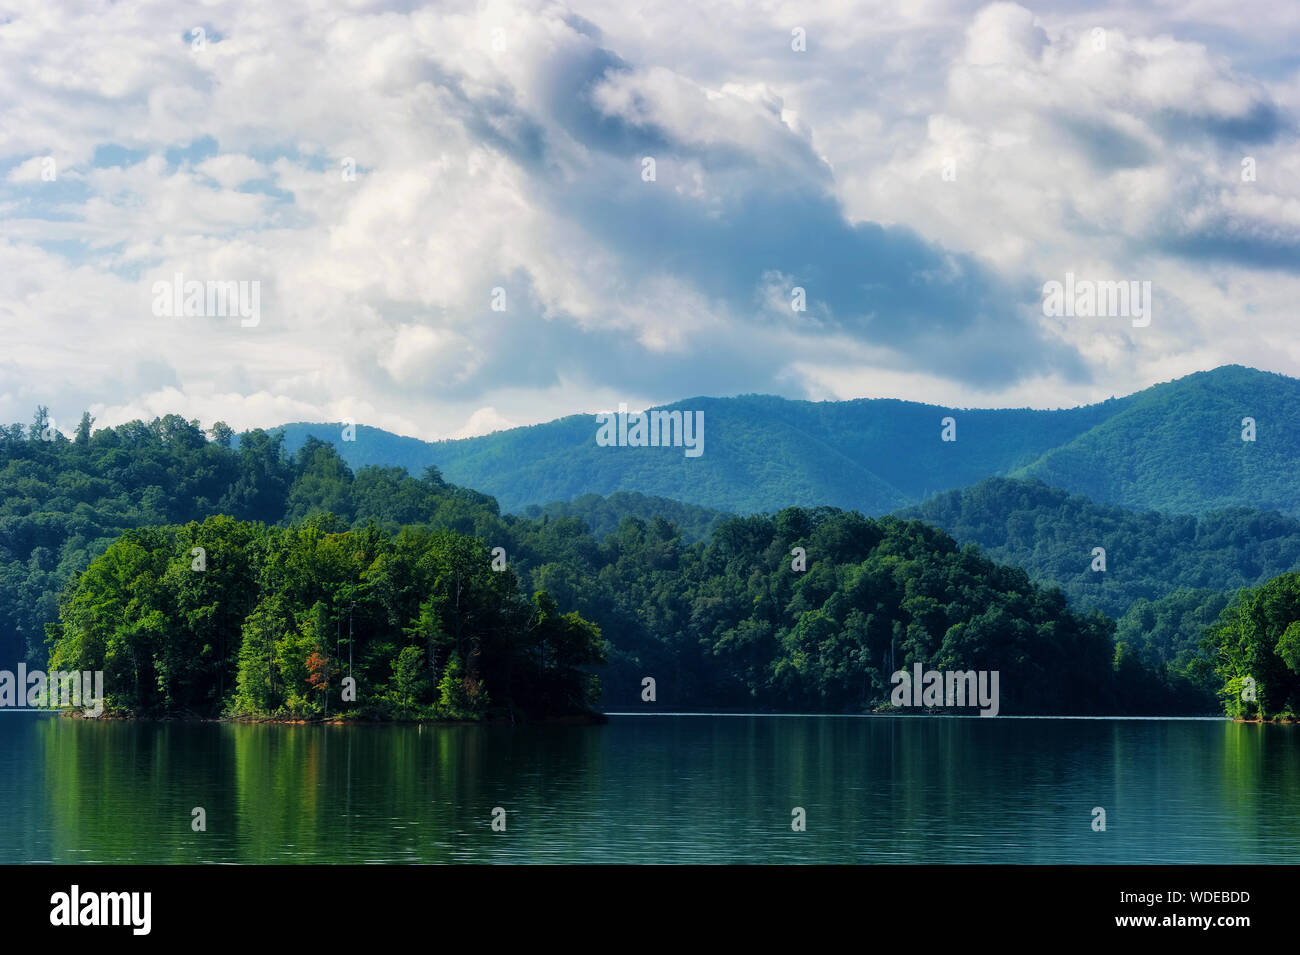 Surreal landscape view of Watauga Lake in eastern Tennessee under cloudy skies. Stock Photo